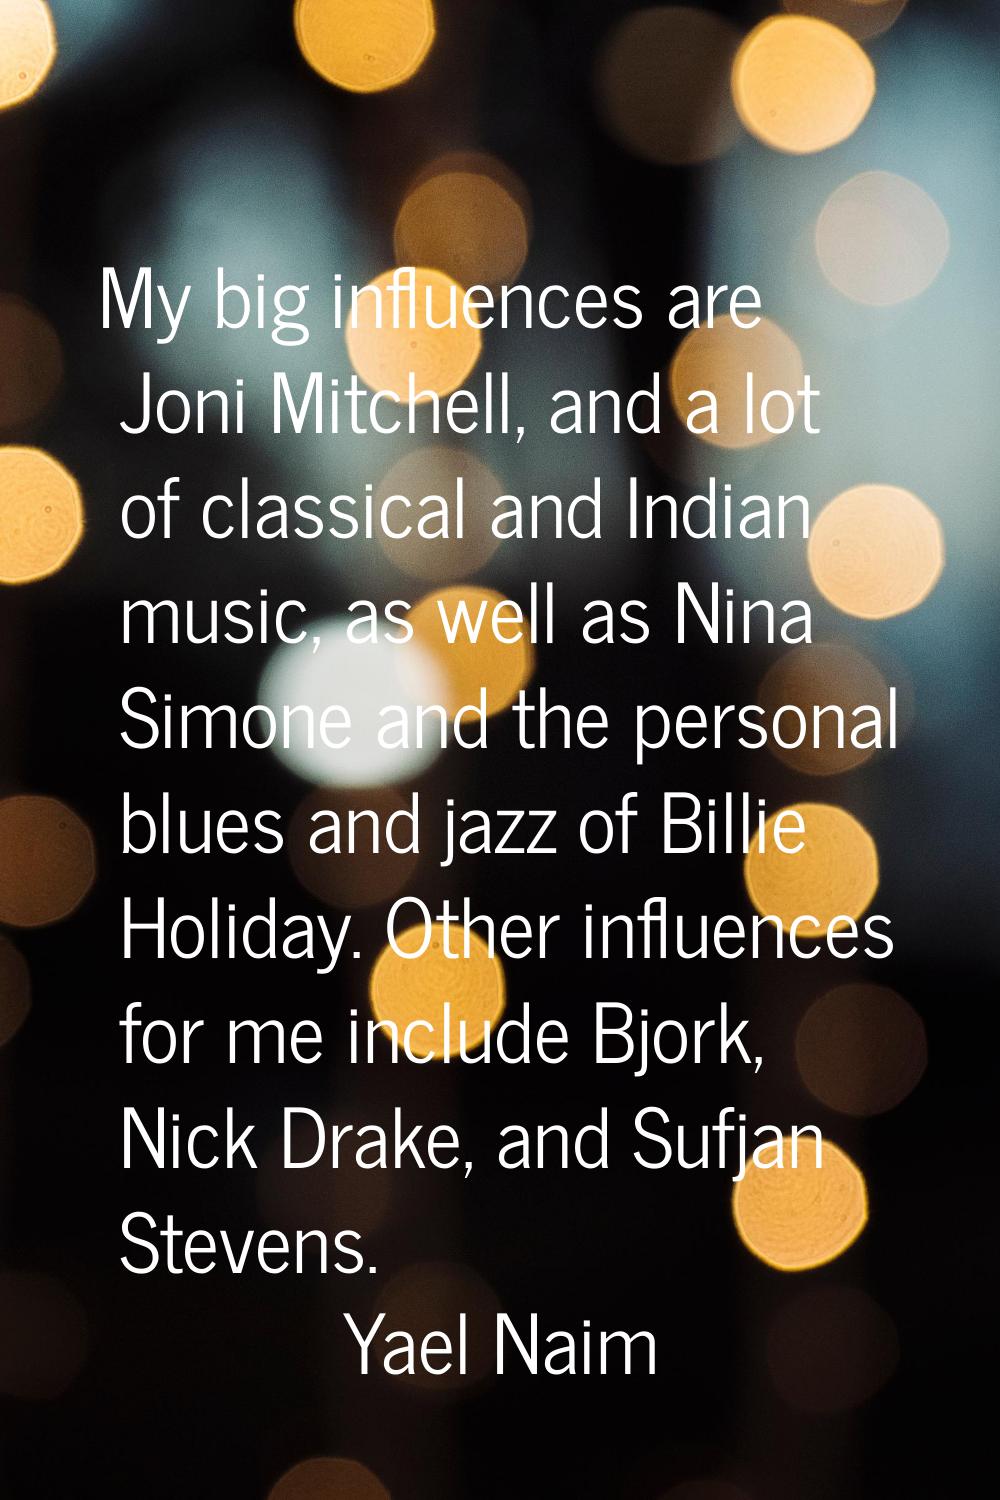 My big influences are Joni Mitchell, and a lot of classical and Indian music, as well as Nina Simon